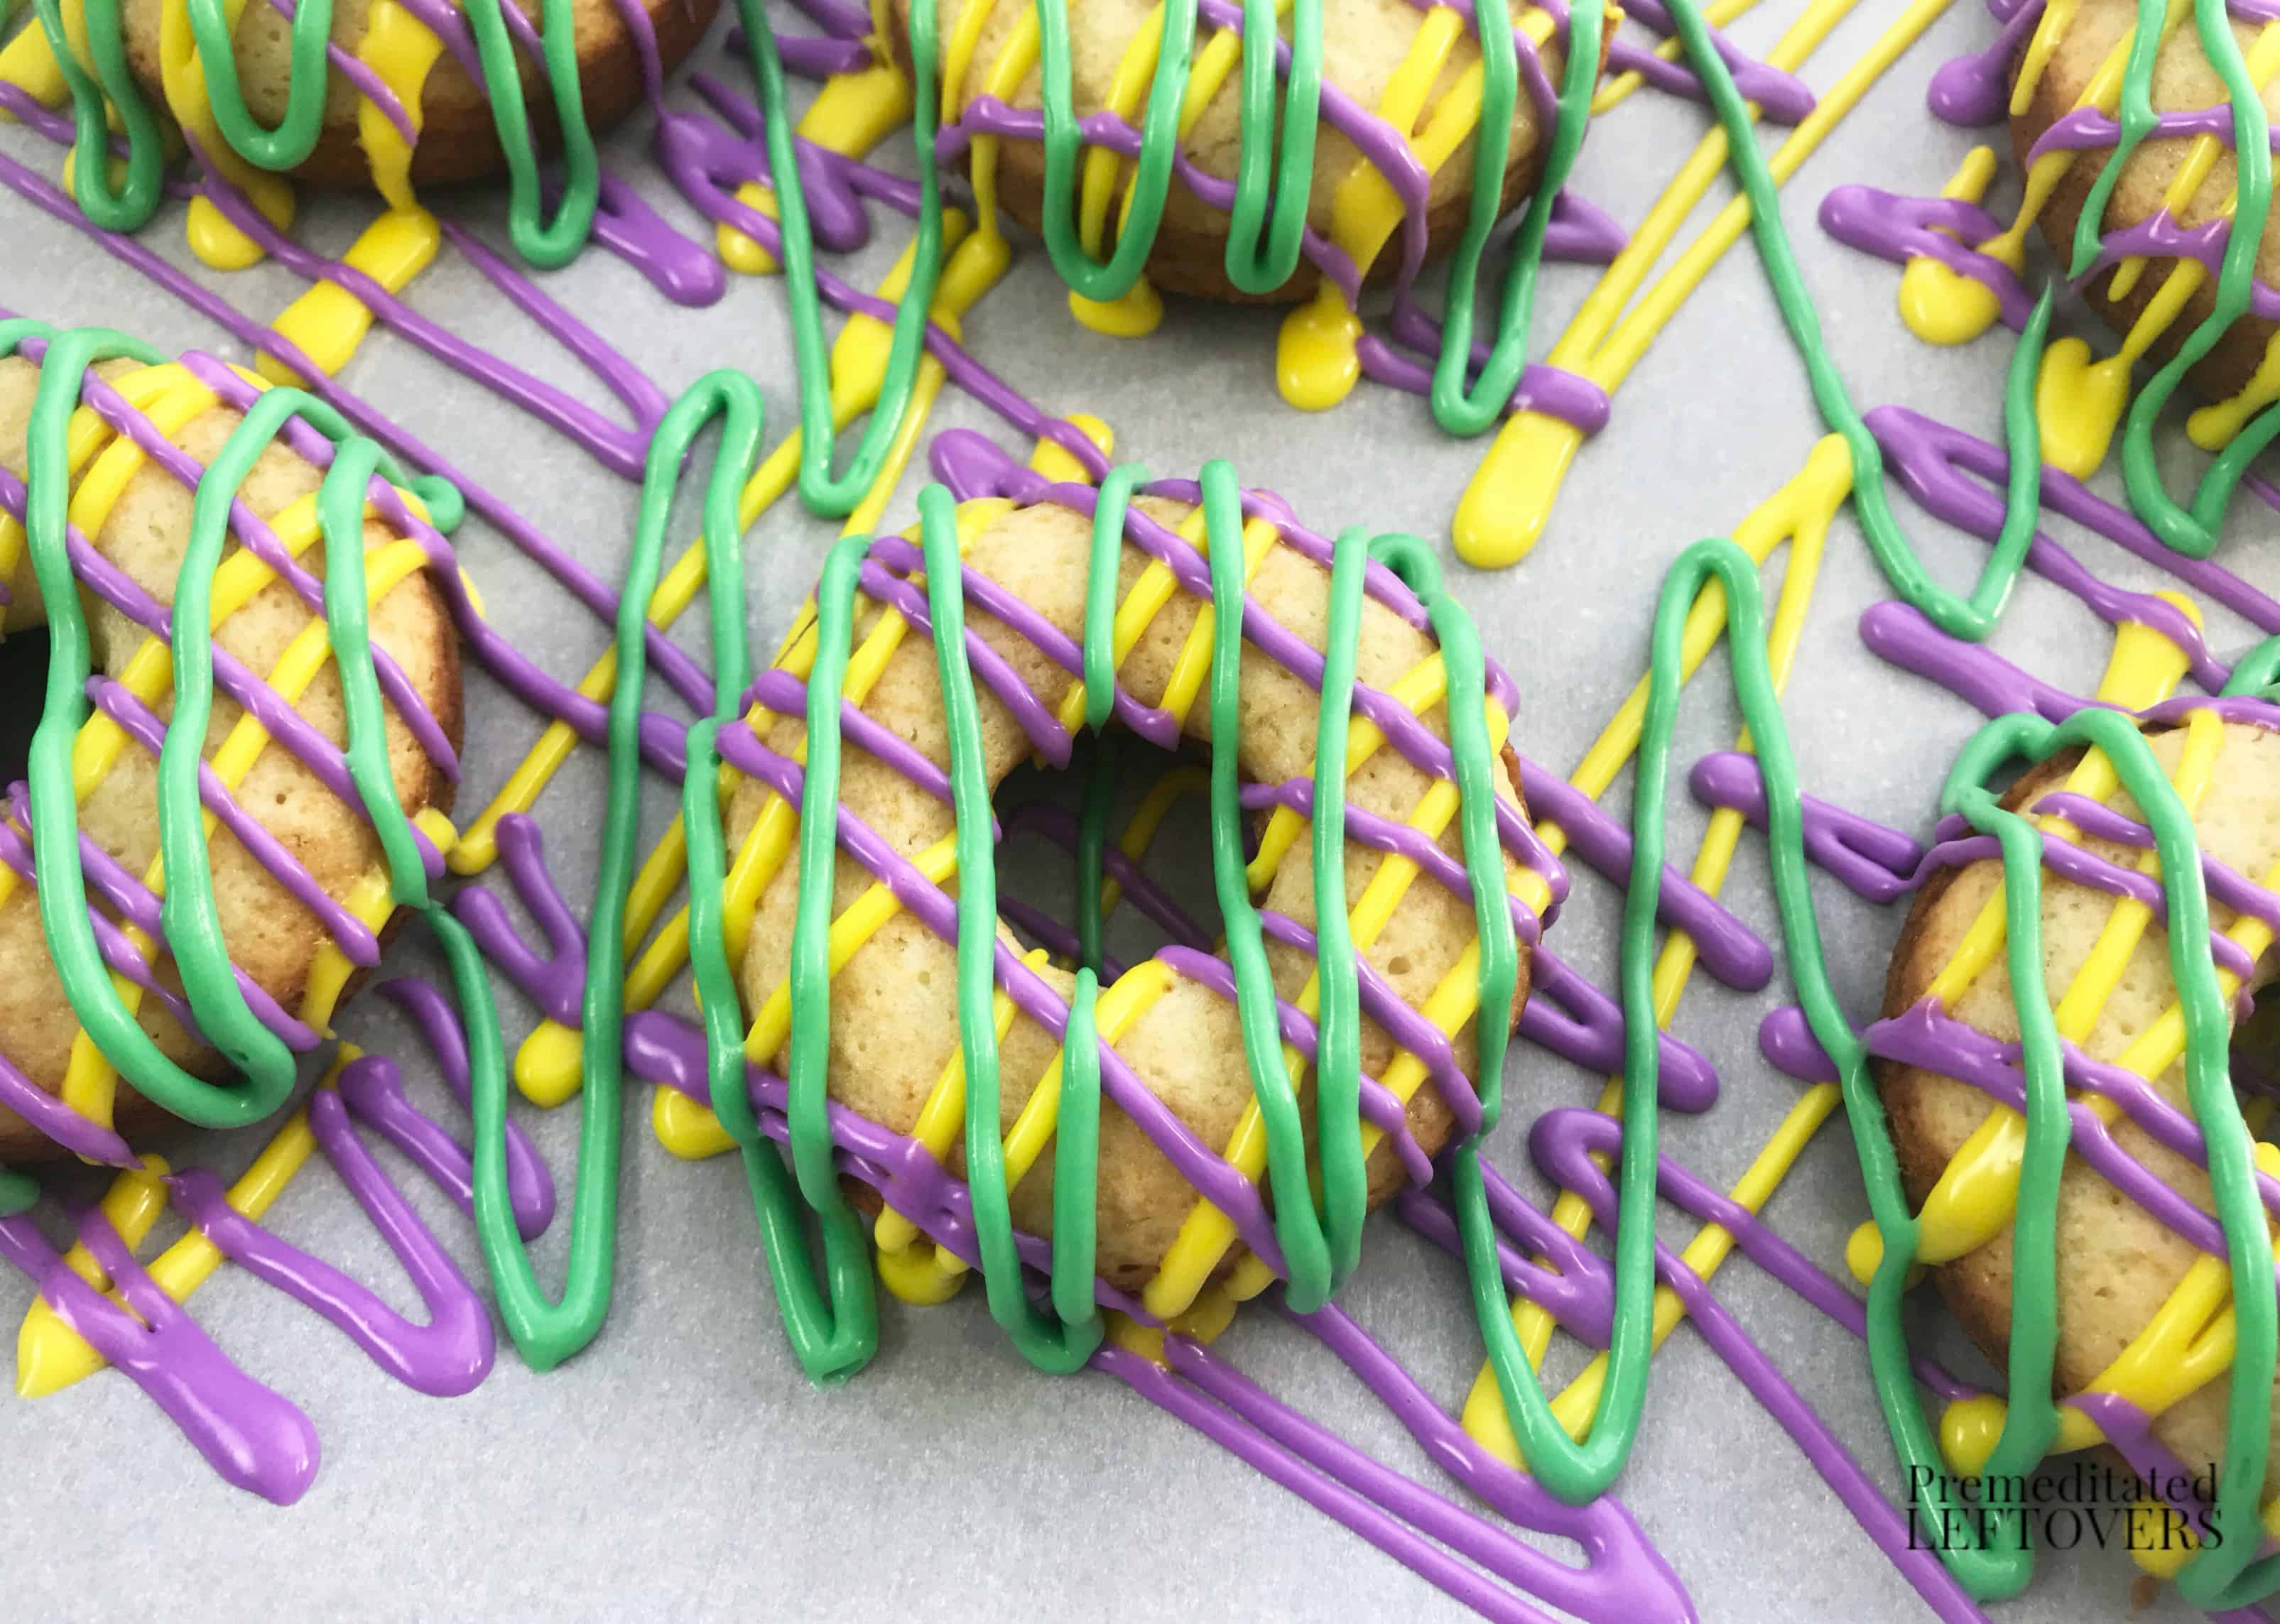 Drizzled icing on King cake donuts